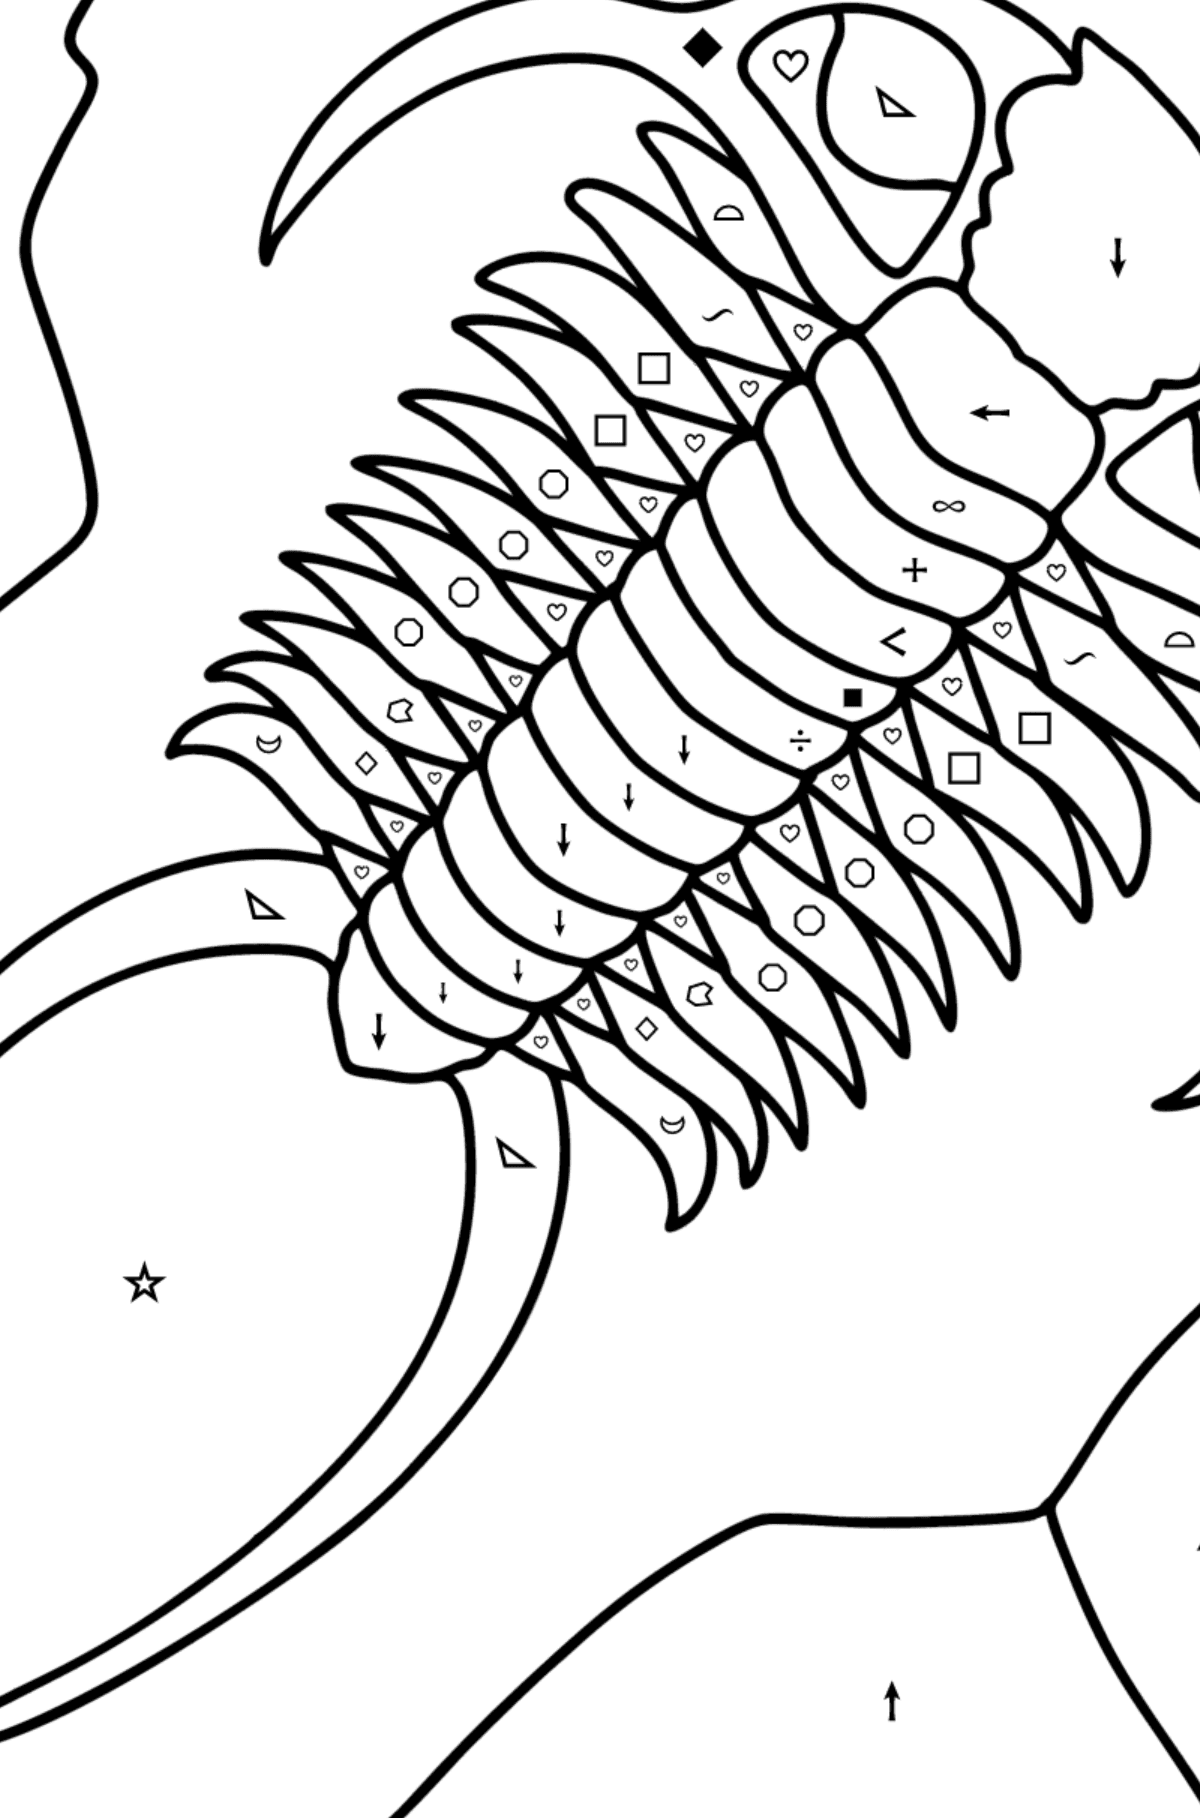 Sea Fossil coloring page - Coloring by Symbols and Geometric Shapes for Kids